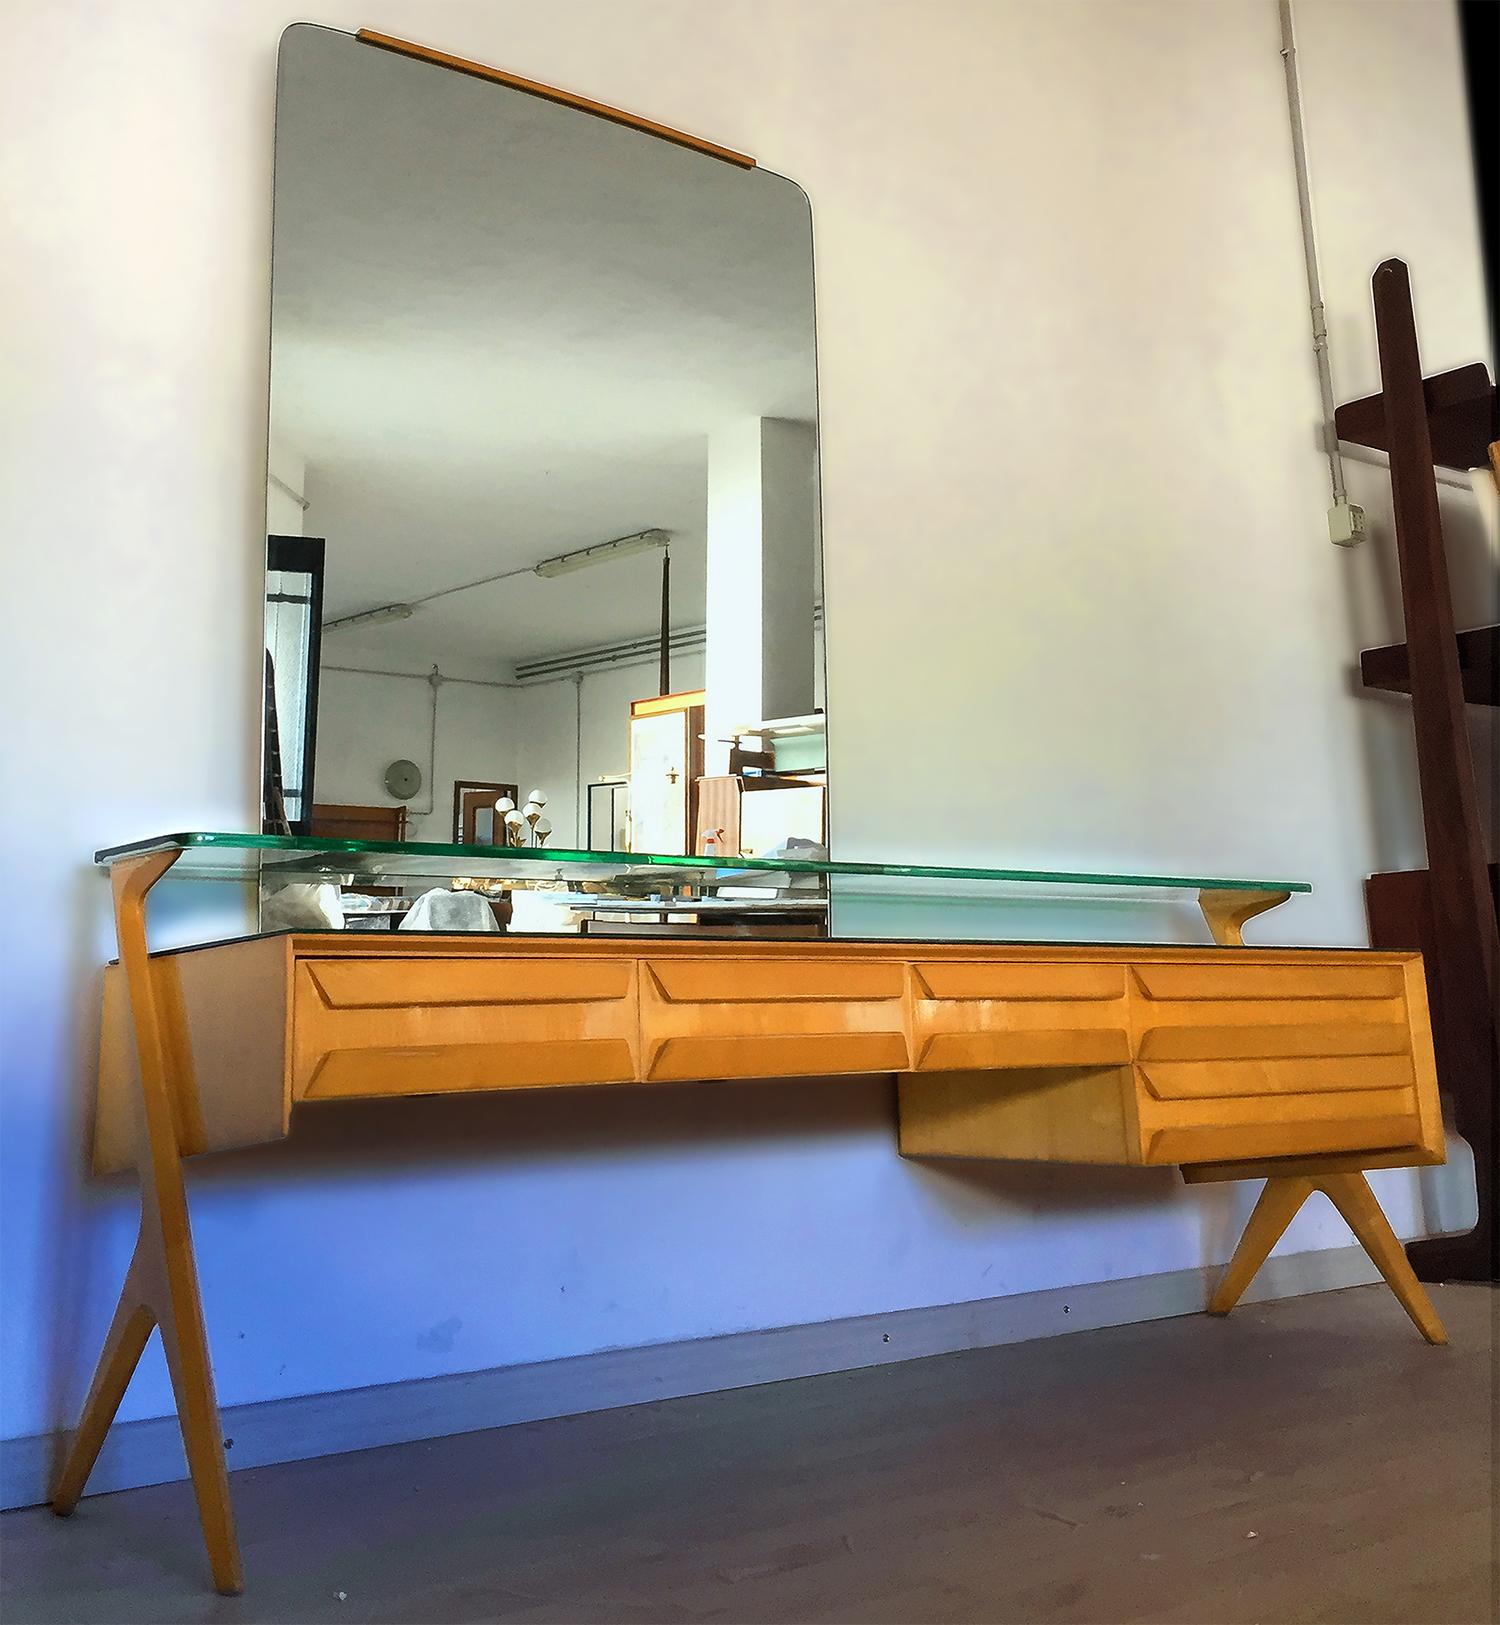 Gorgeous maple vanity dresser with mirror designed by Vittorio & Plinio Dassi in the 1950s.
Its aesthetic uniqueness is given by the original sculptural shape design of the dresser, sourmounted by a vertical wall mirror with unusual asymmetrical